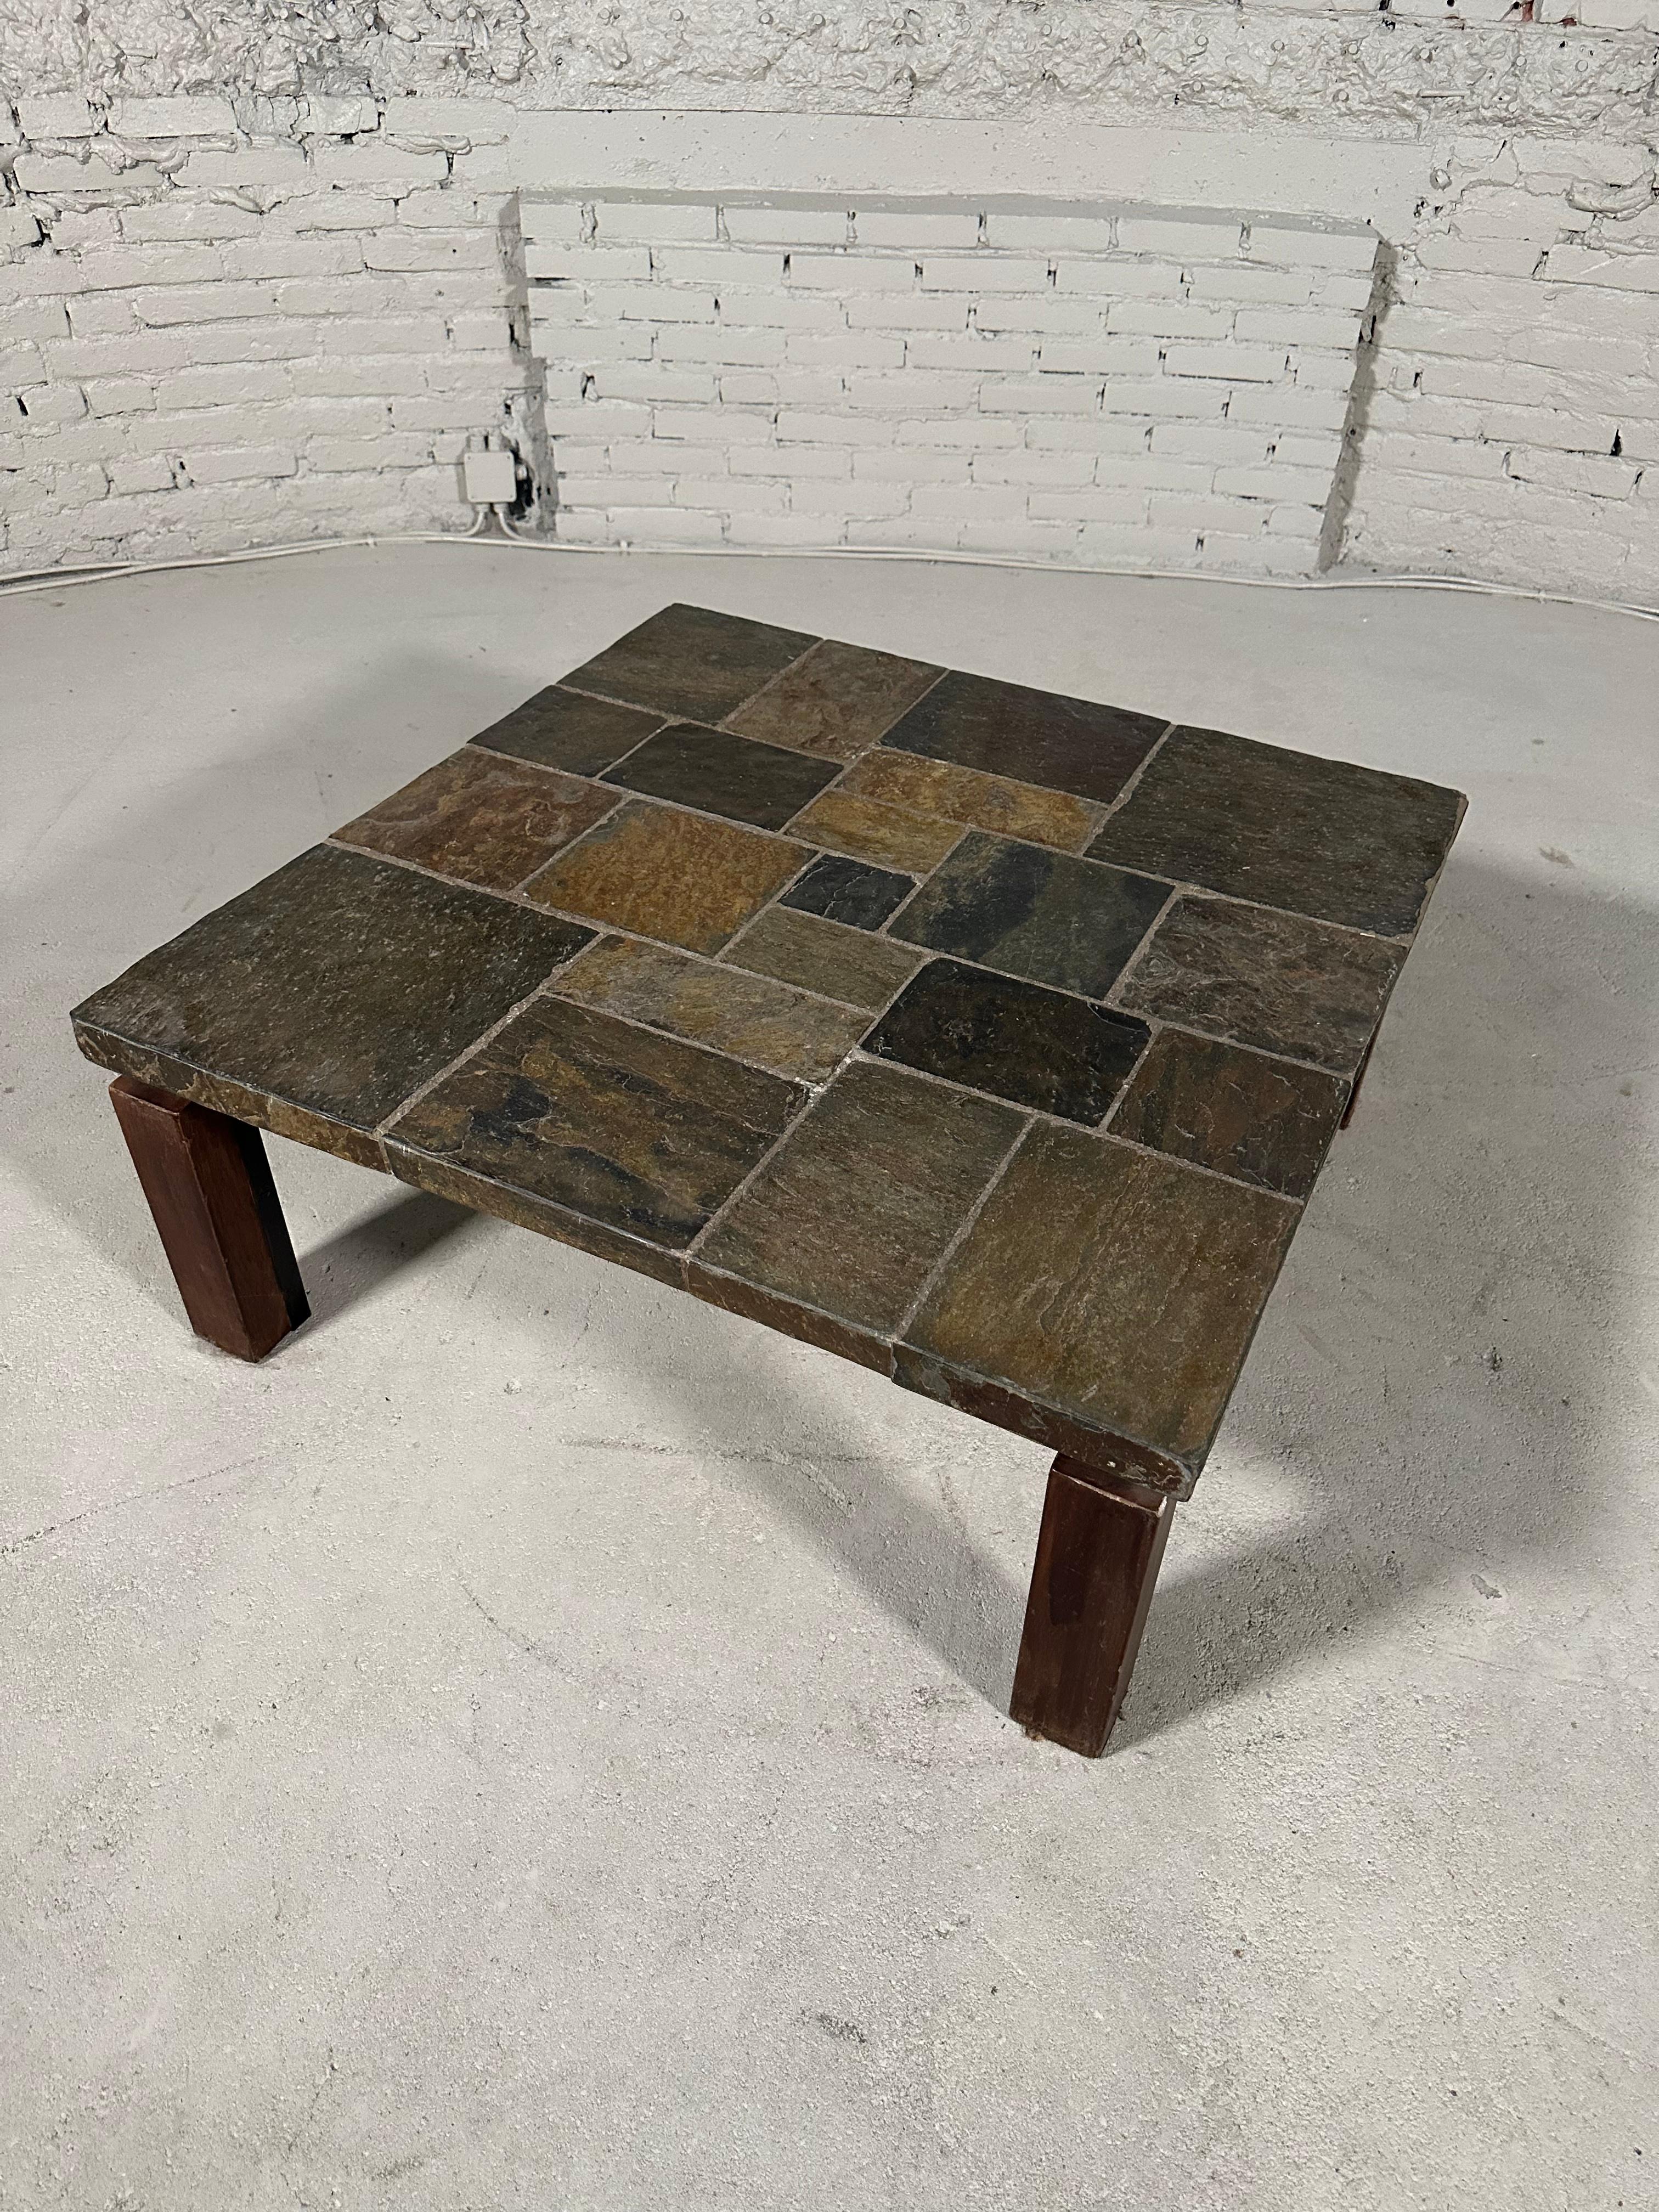 A square coffee table reminiscent of Paul Kingma's work, presumably made in the 1970's. 

The tabletop is constructed with squares of different types of natural stone. It rests on a black lacquered steel base with wooden legs. Wear is consistent